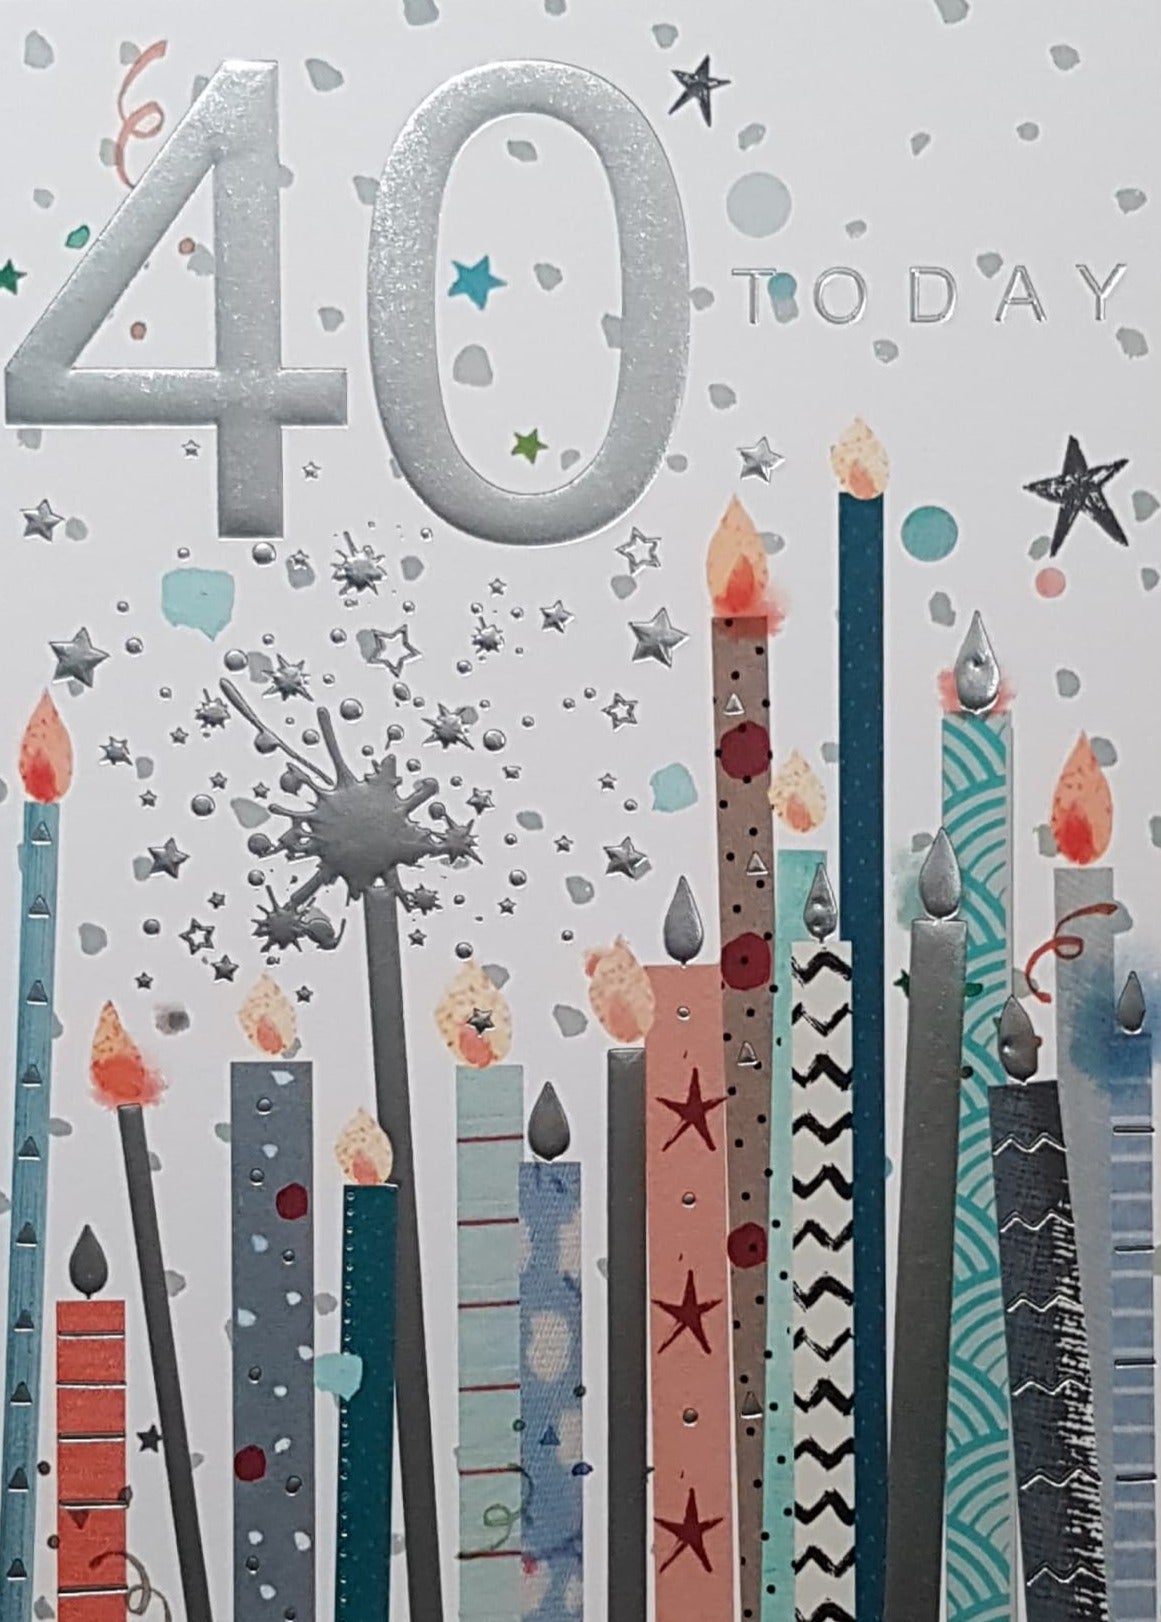 Age 40 Birthday Card - Many Different Candles With Patterns & A Silver Font